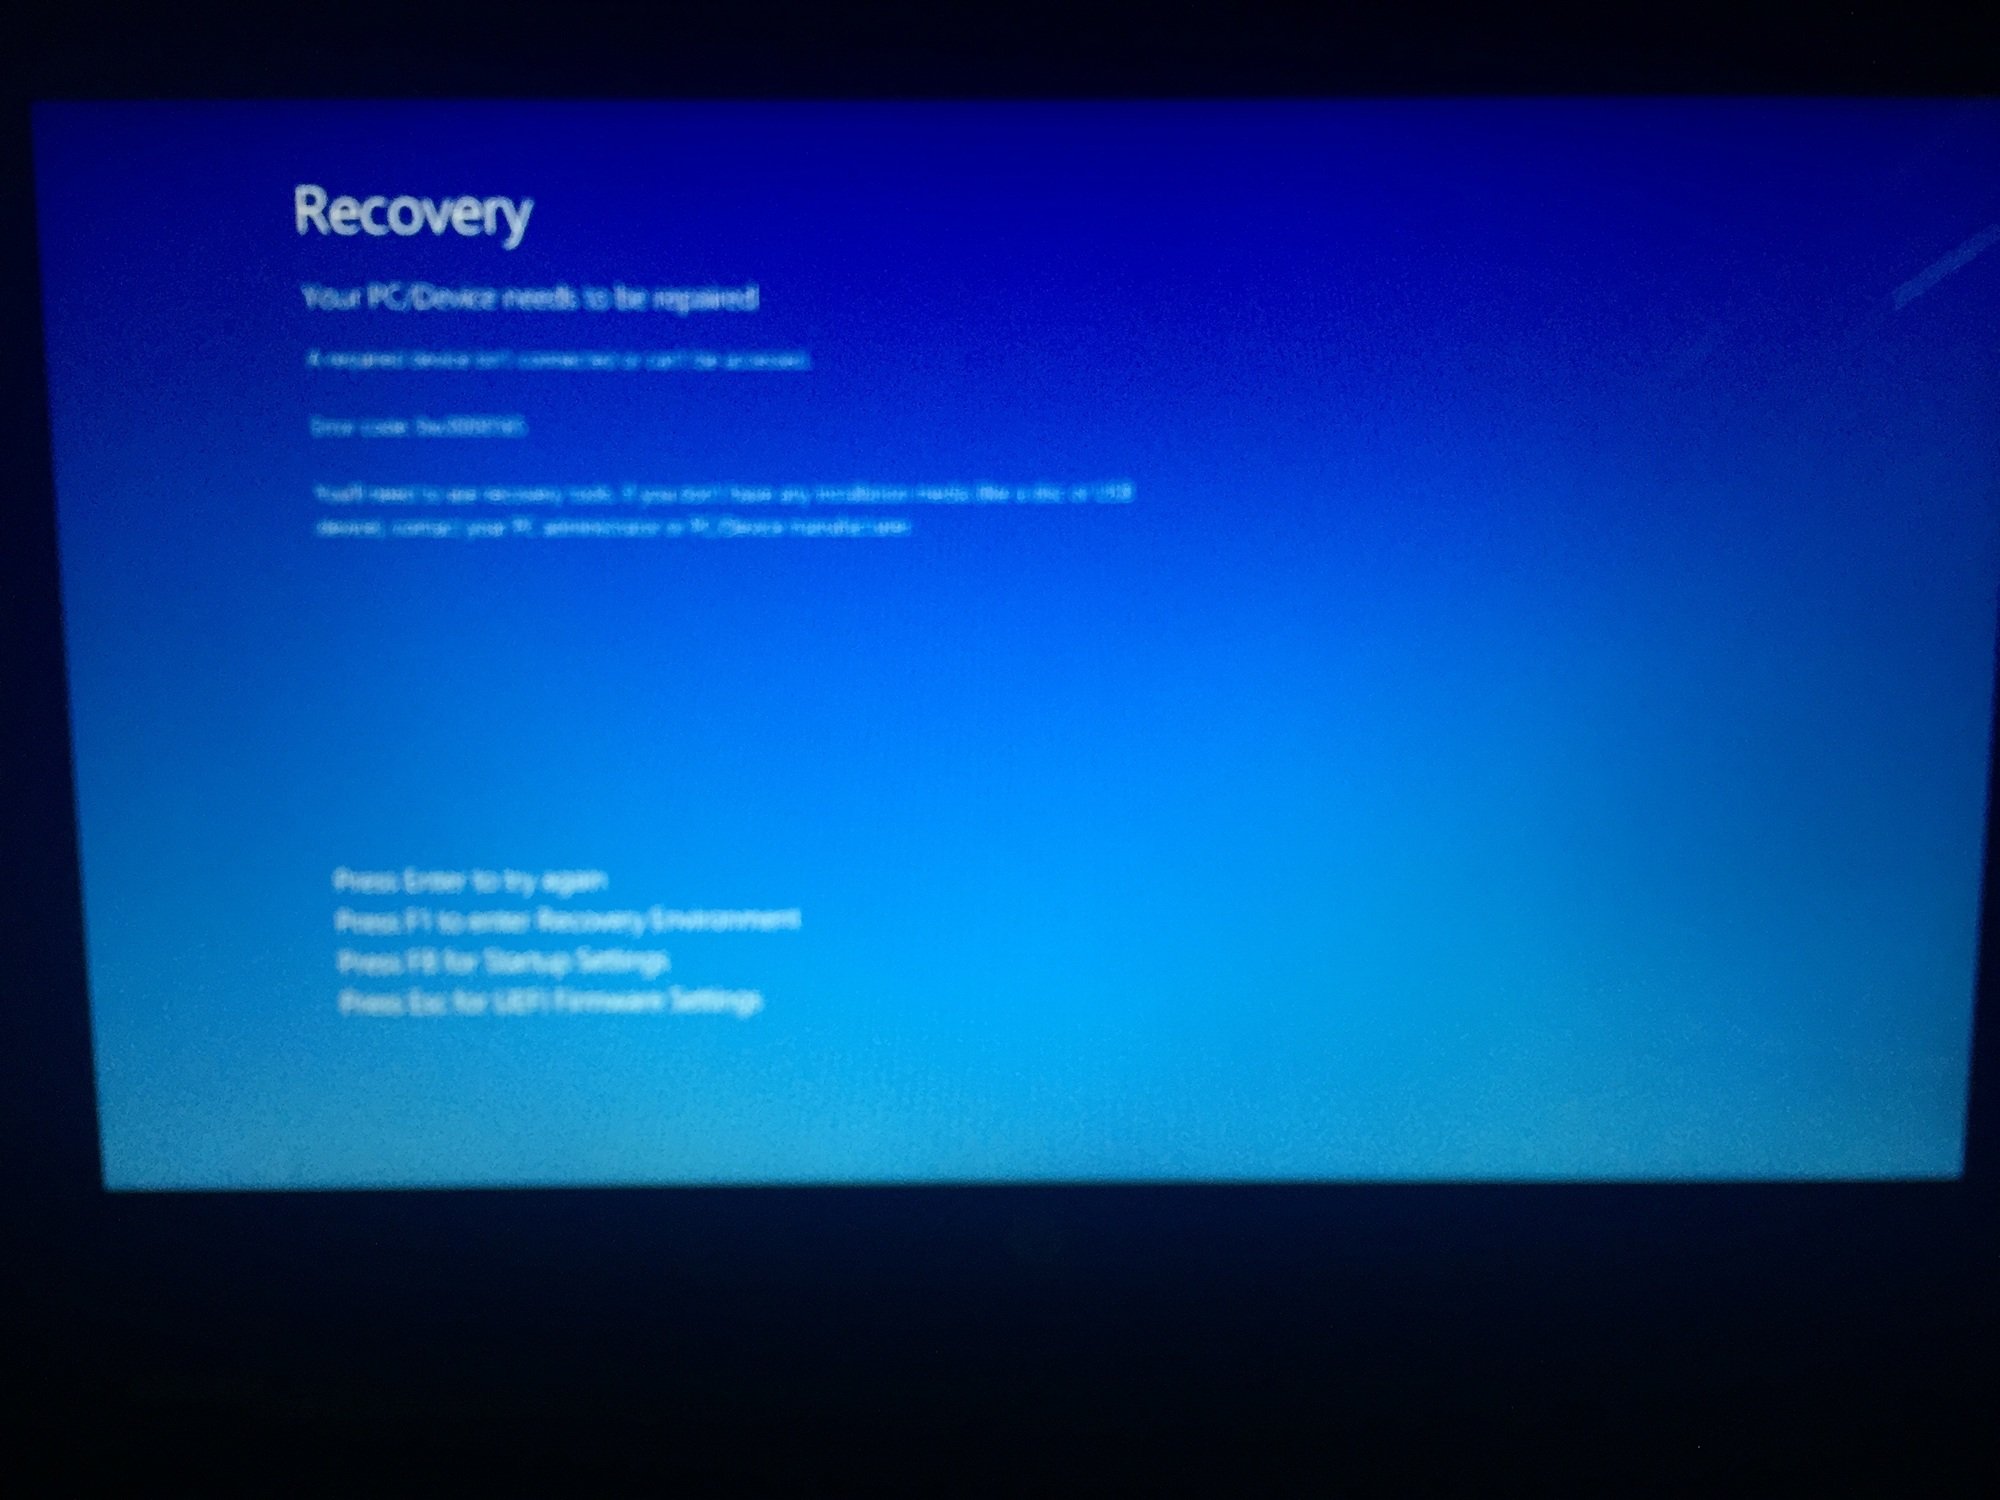 HP laptop stuck in Recovery Mode